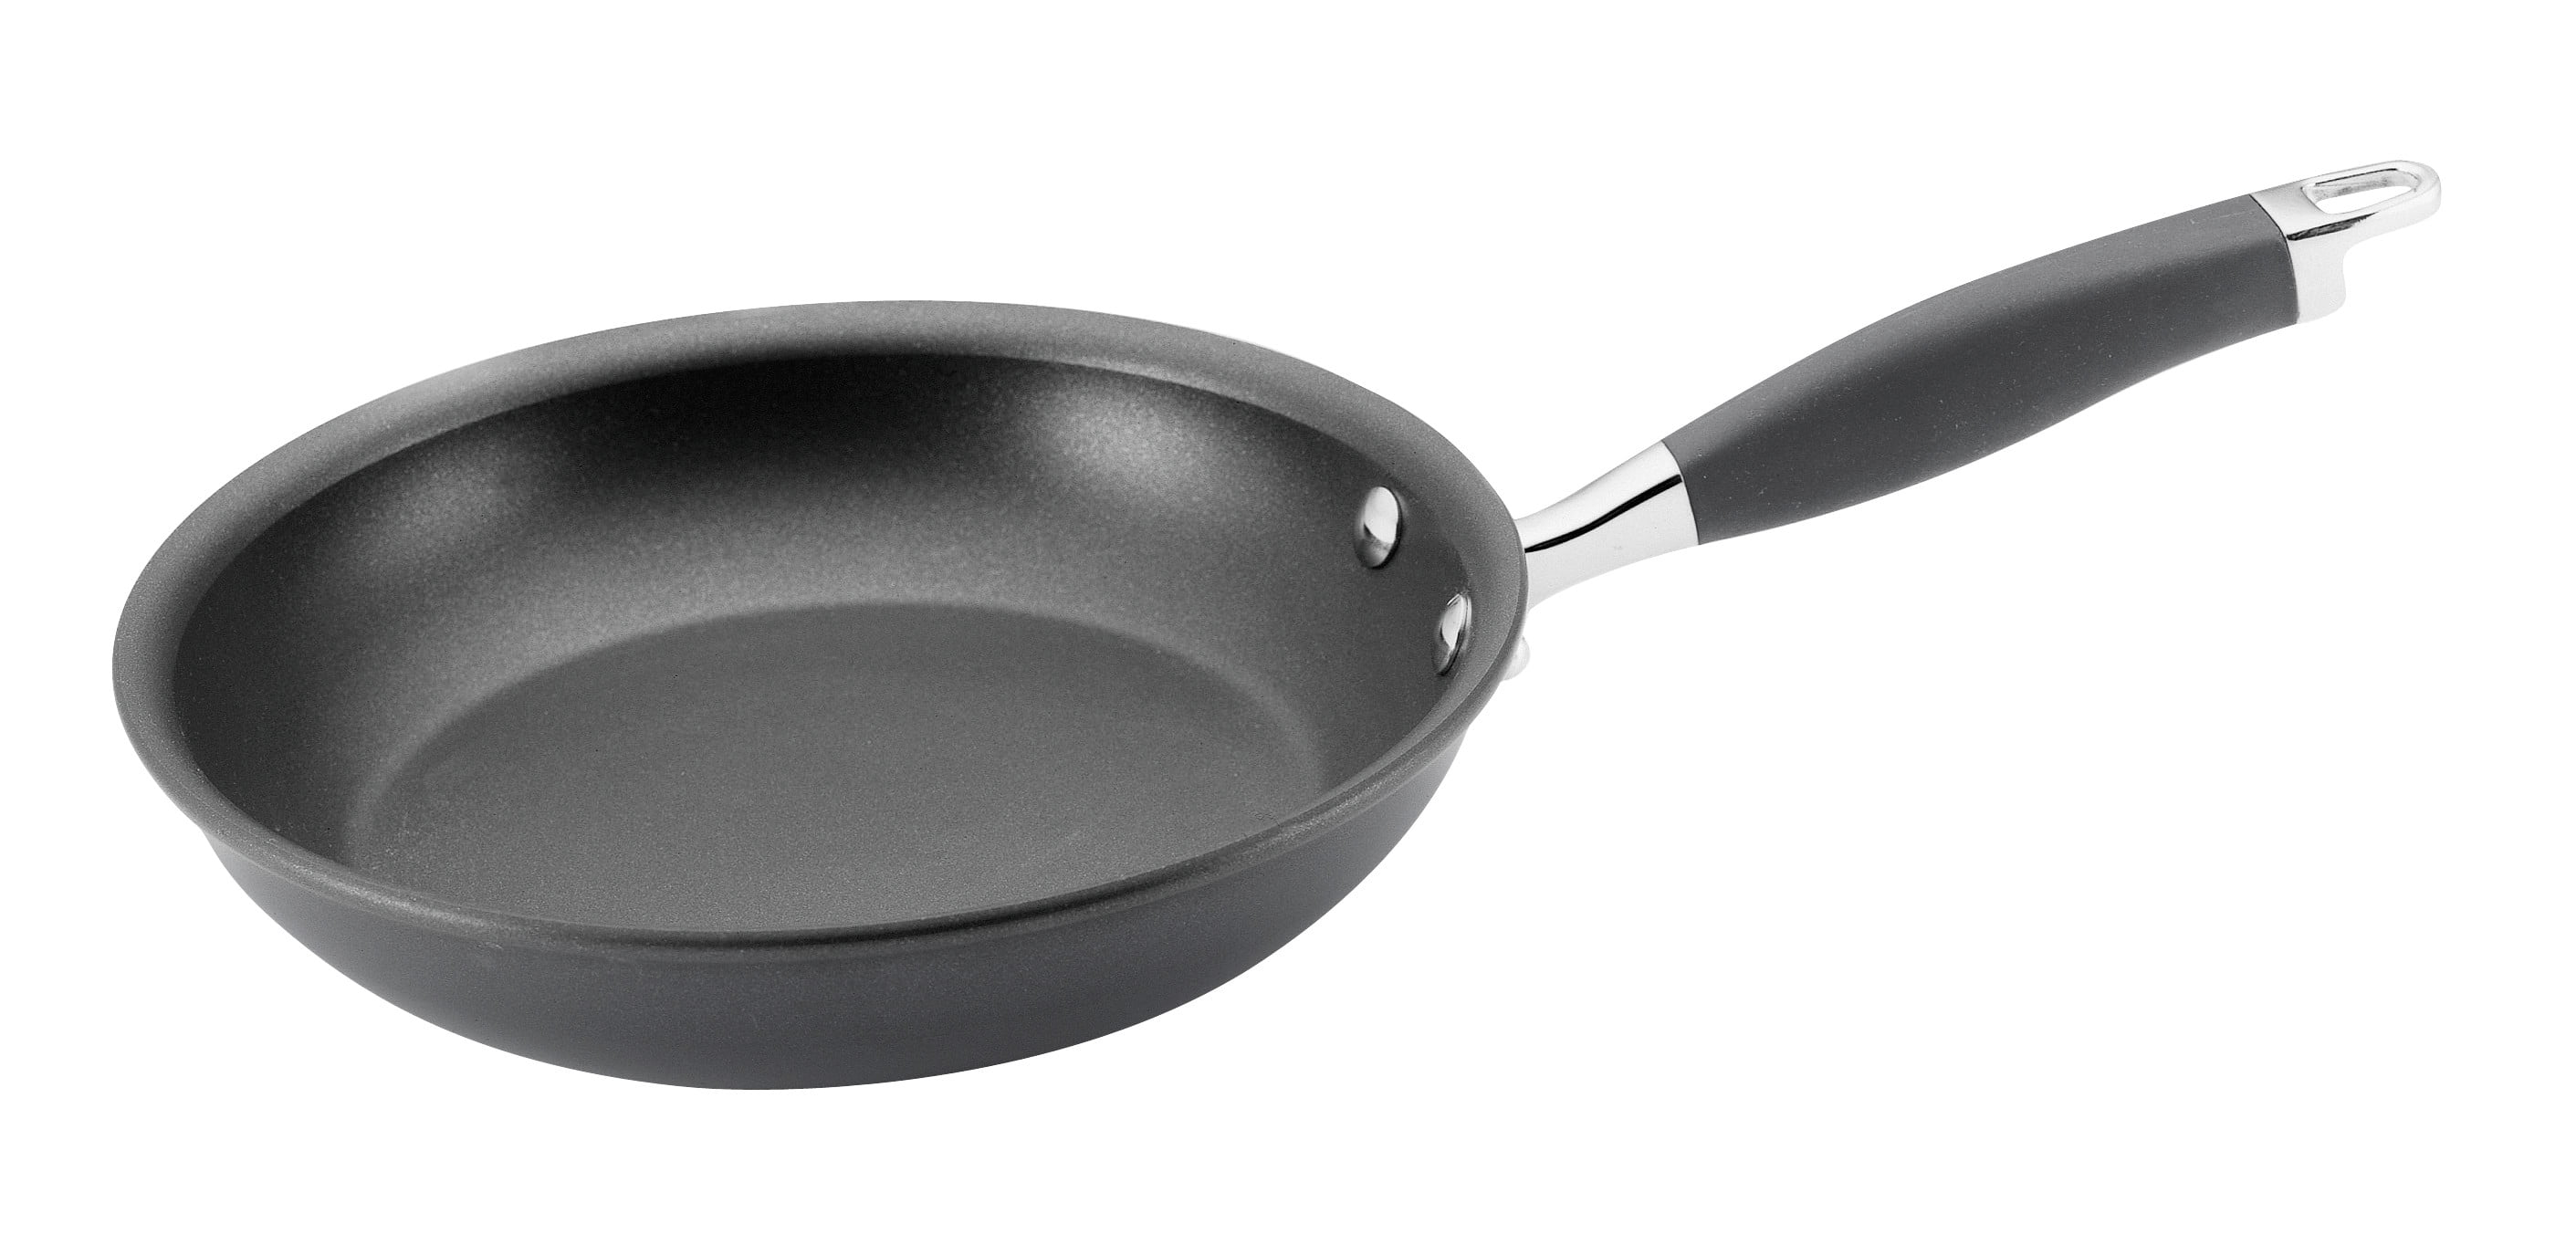 Anolon Nouvelle Professional Frying Pan with Advanced Non-Stick System Stainless Steel and Hard Anodised Aluminium Non-Stick Frying Pan Crafted from Copper Black 24 cm